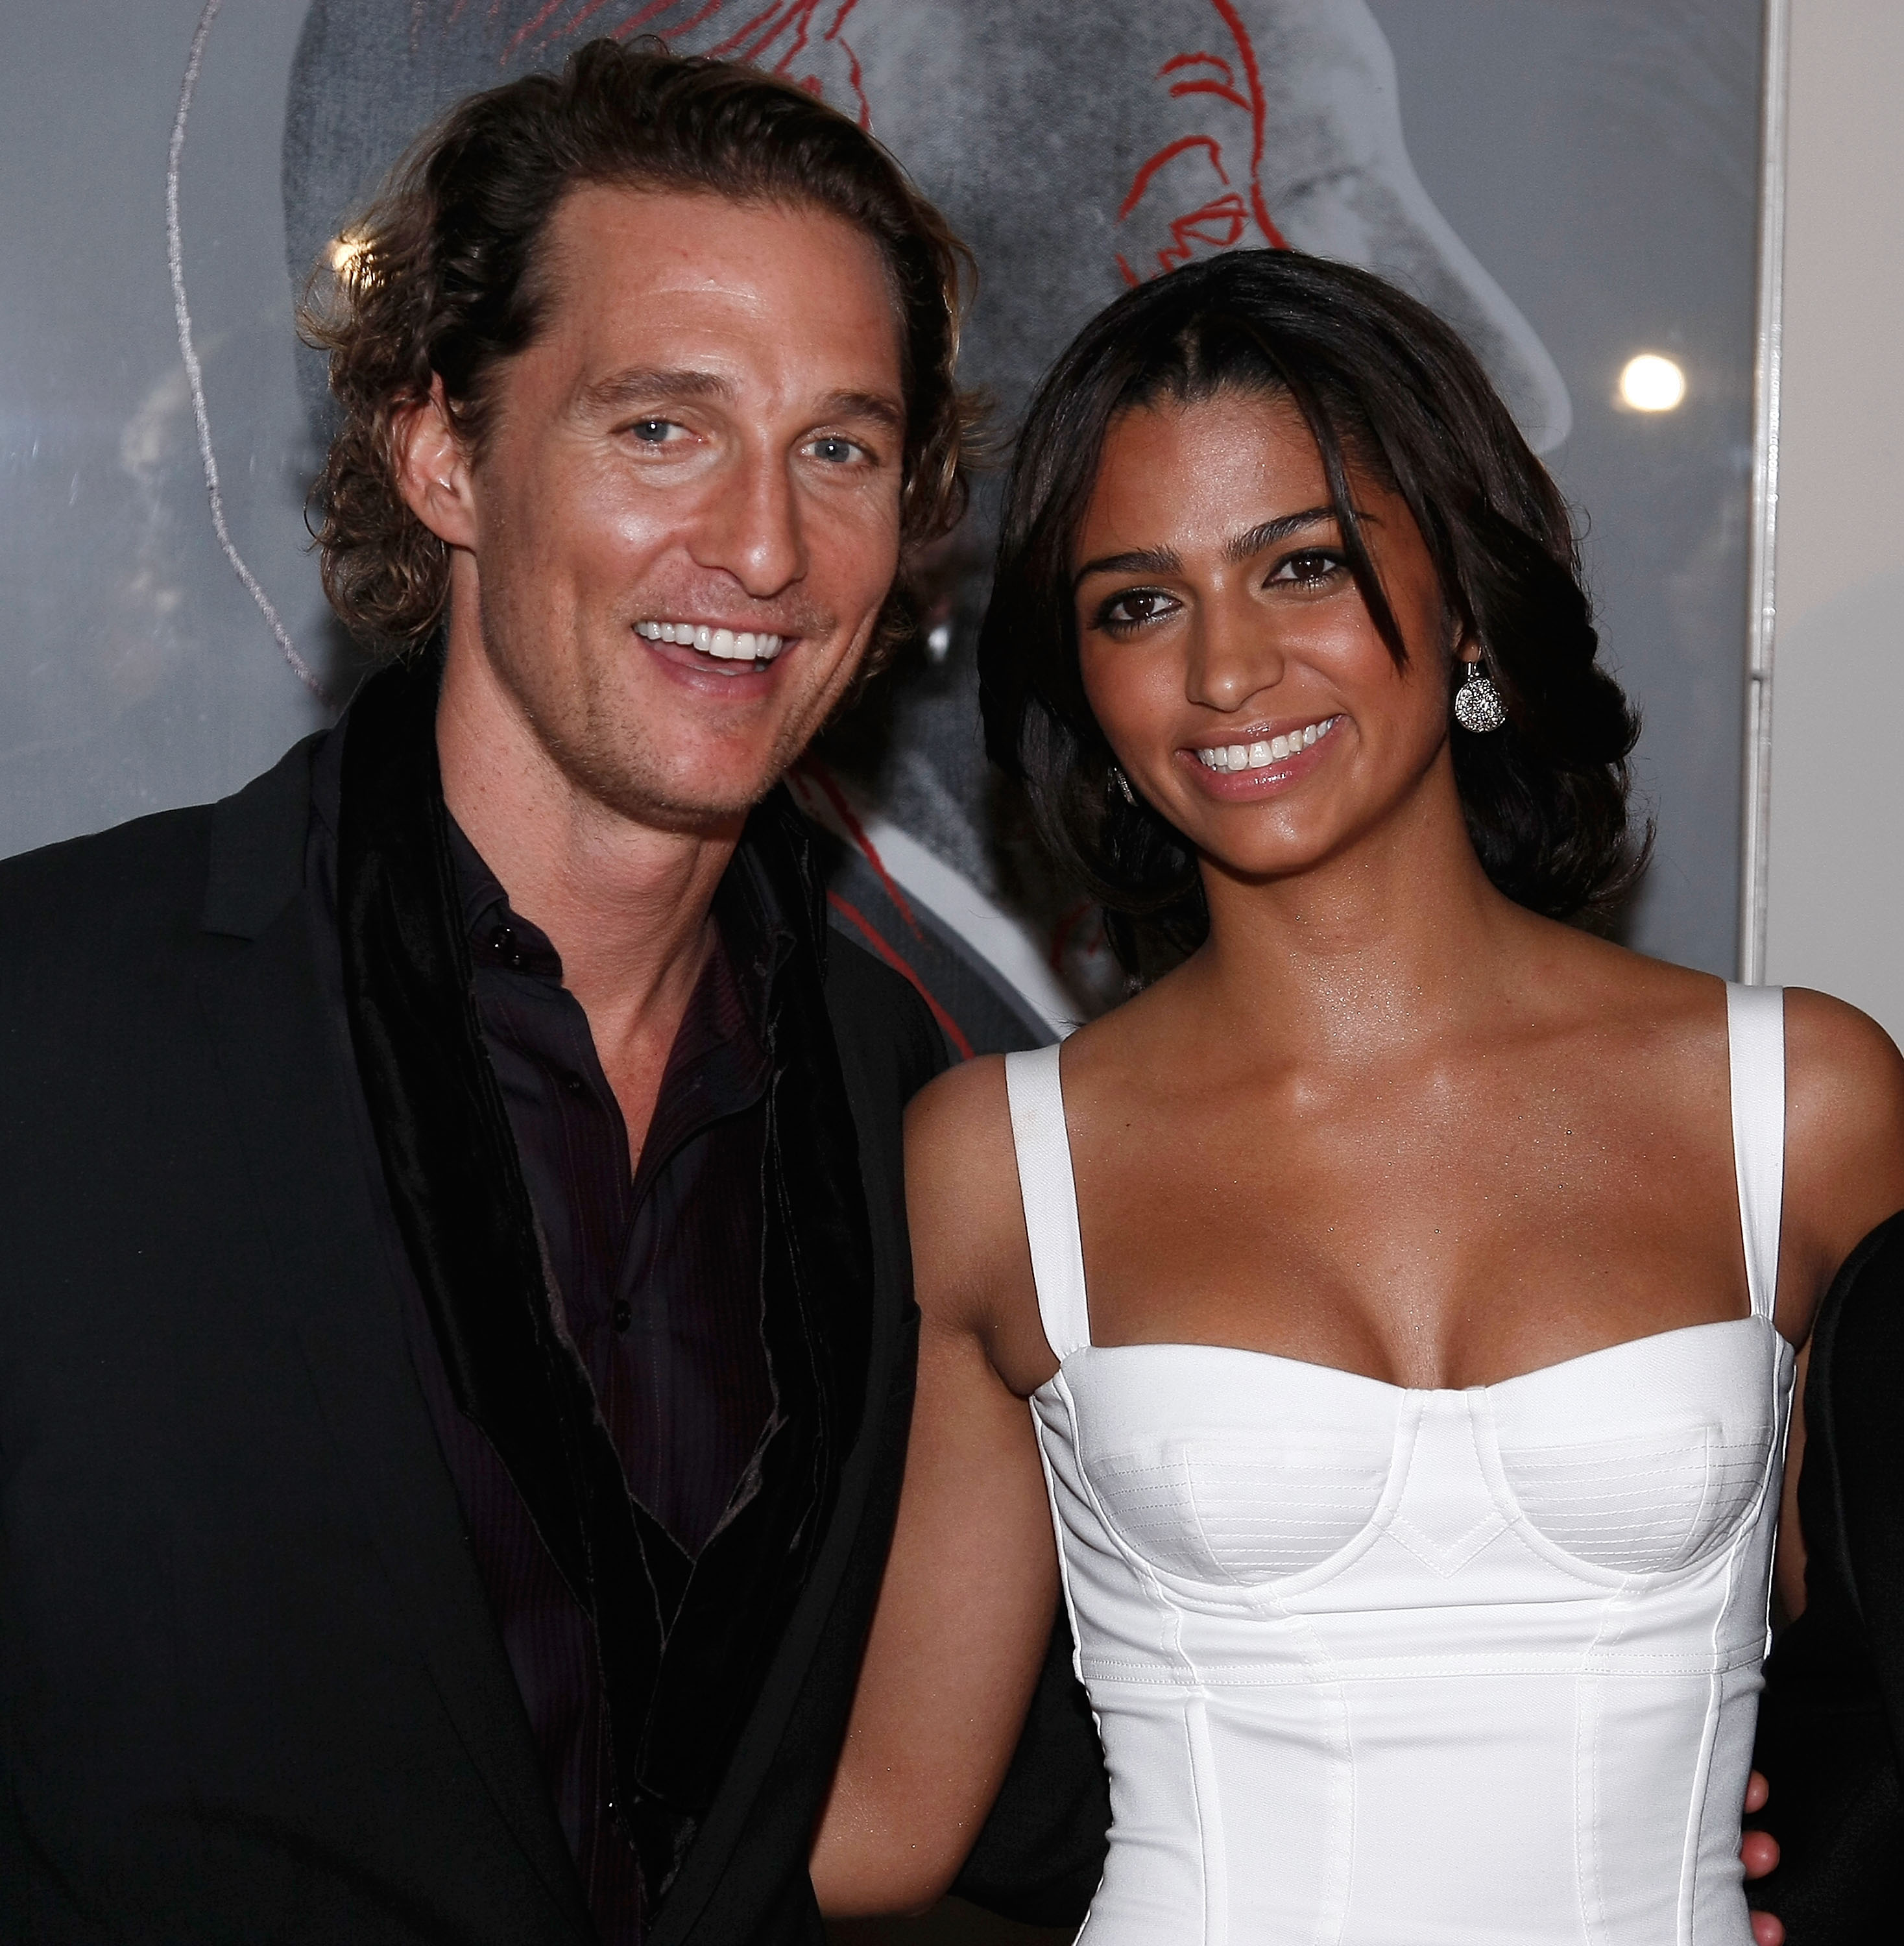 Matthew McConaughey and Camila Alves on December 4, 2007, in New York City | Source: Getty Images